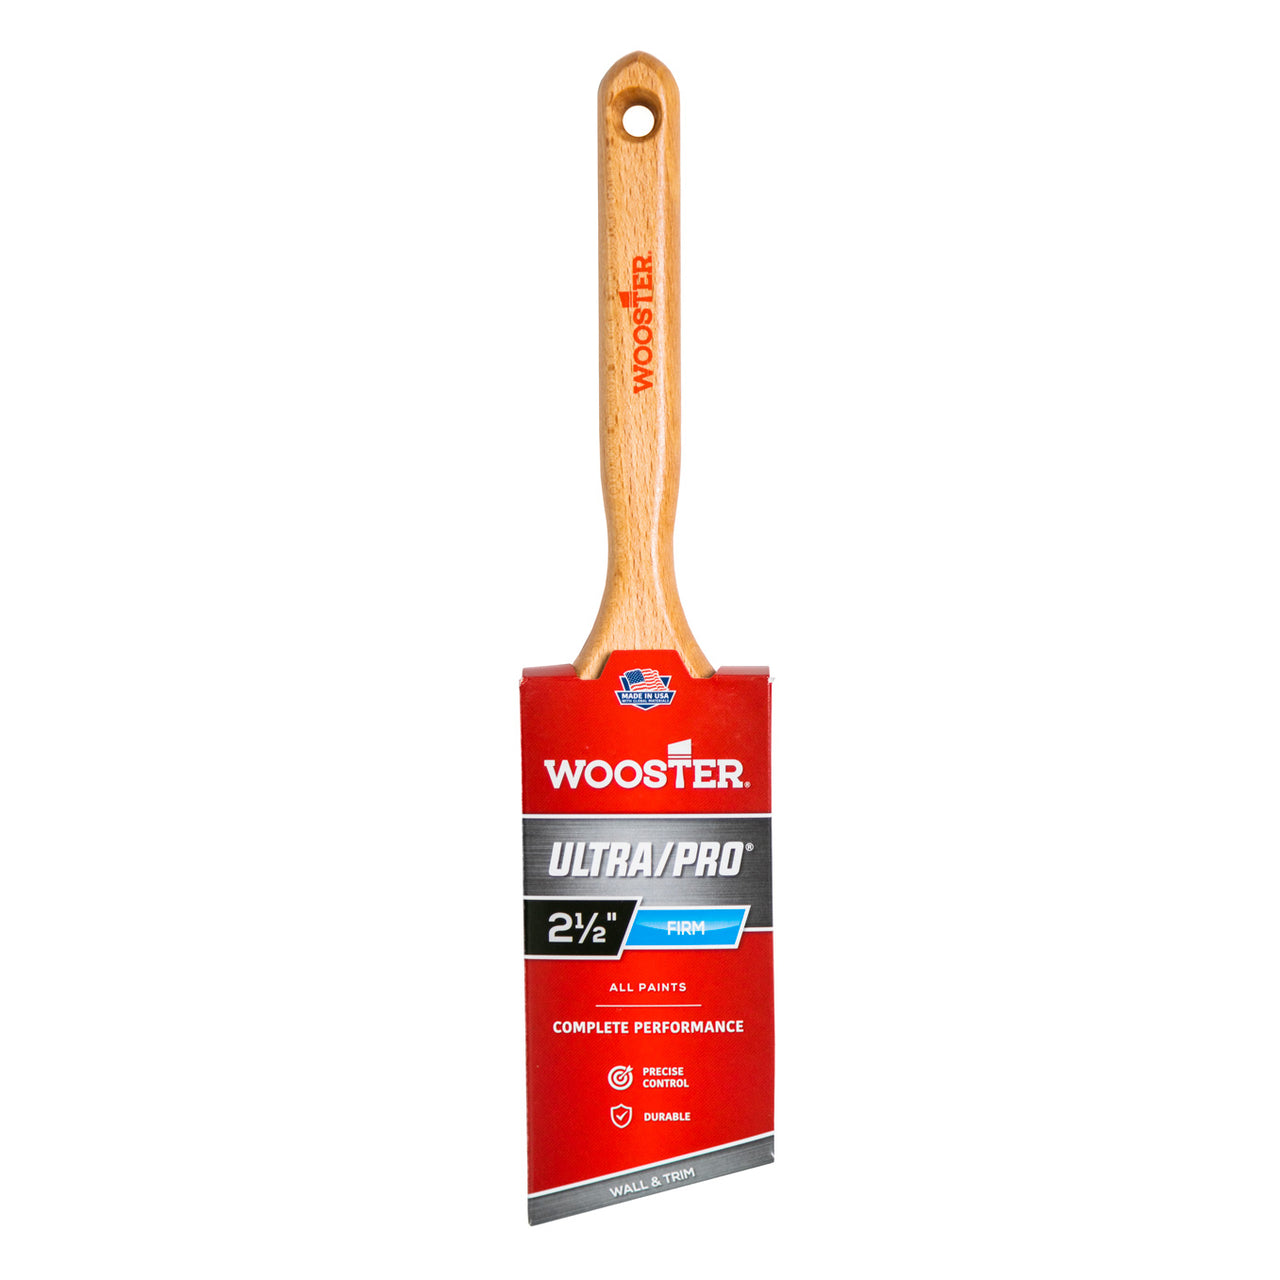 Wooster Ultra/Pro Paint Brush